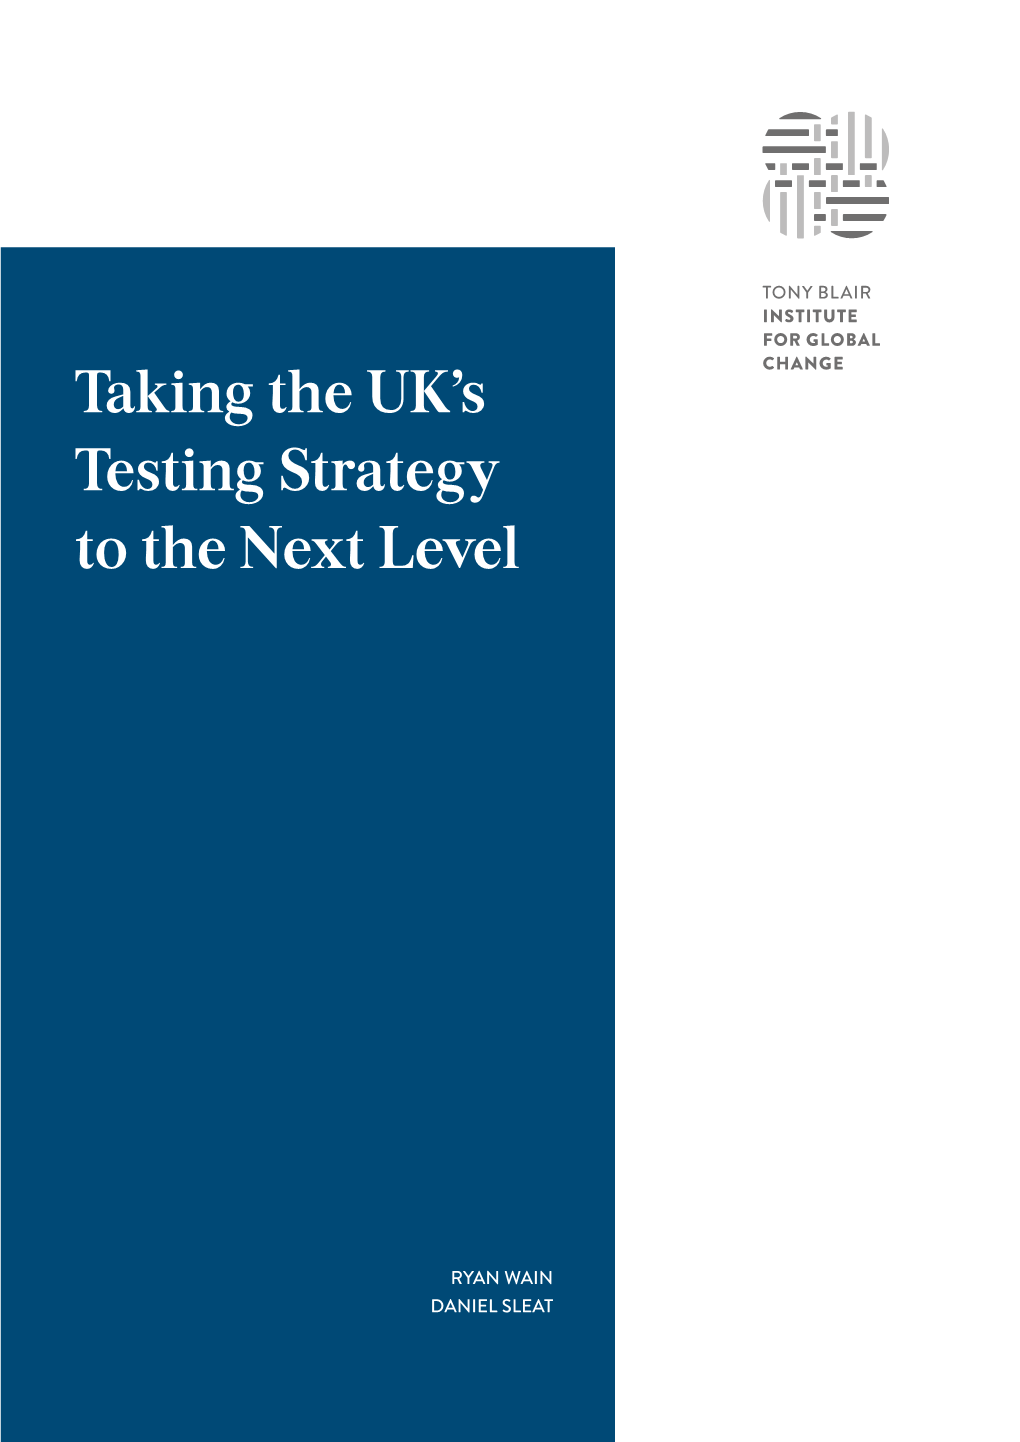 Taking the UK's Testing Strategy to the Next Level | Institute for Global Change